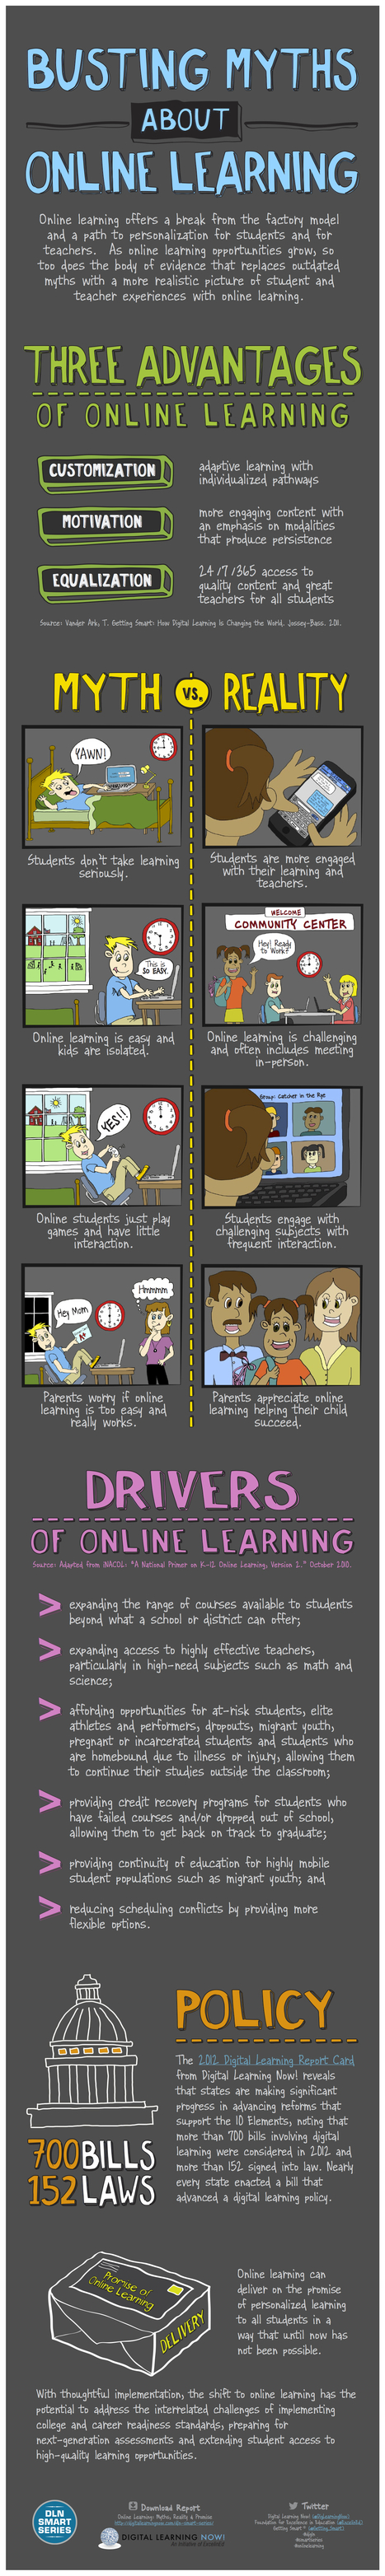 Infographic: Busting Myths About Online Learning | Strictly pedagogical | Scoop.it